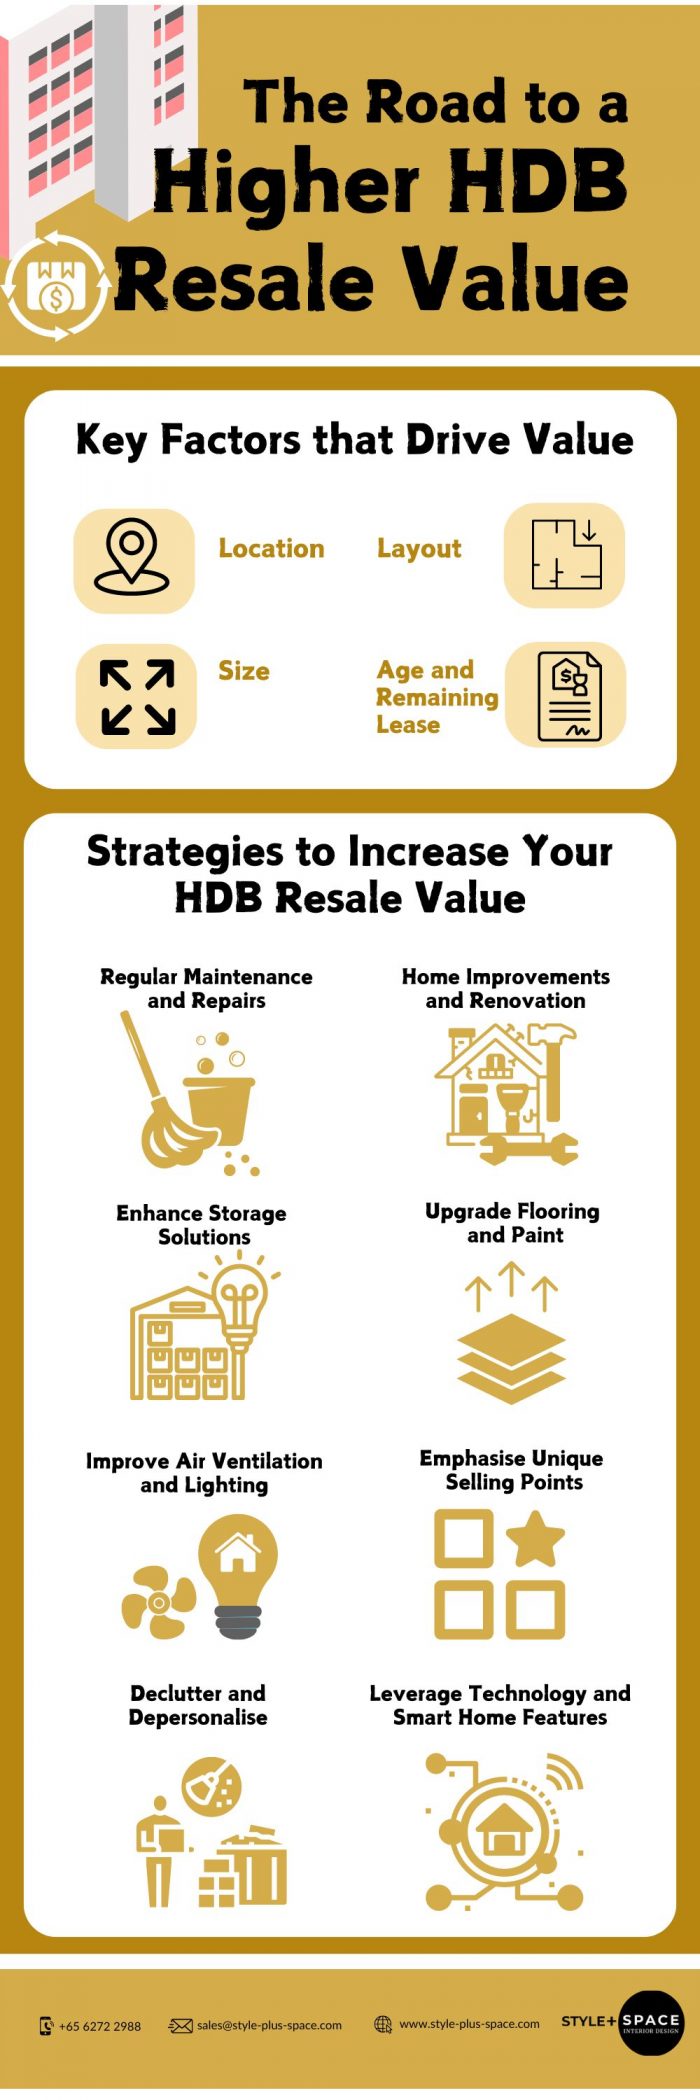 The Road to a Higher HDB Resale Value